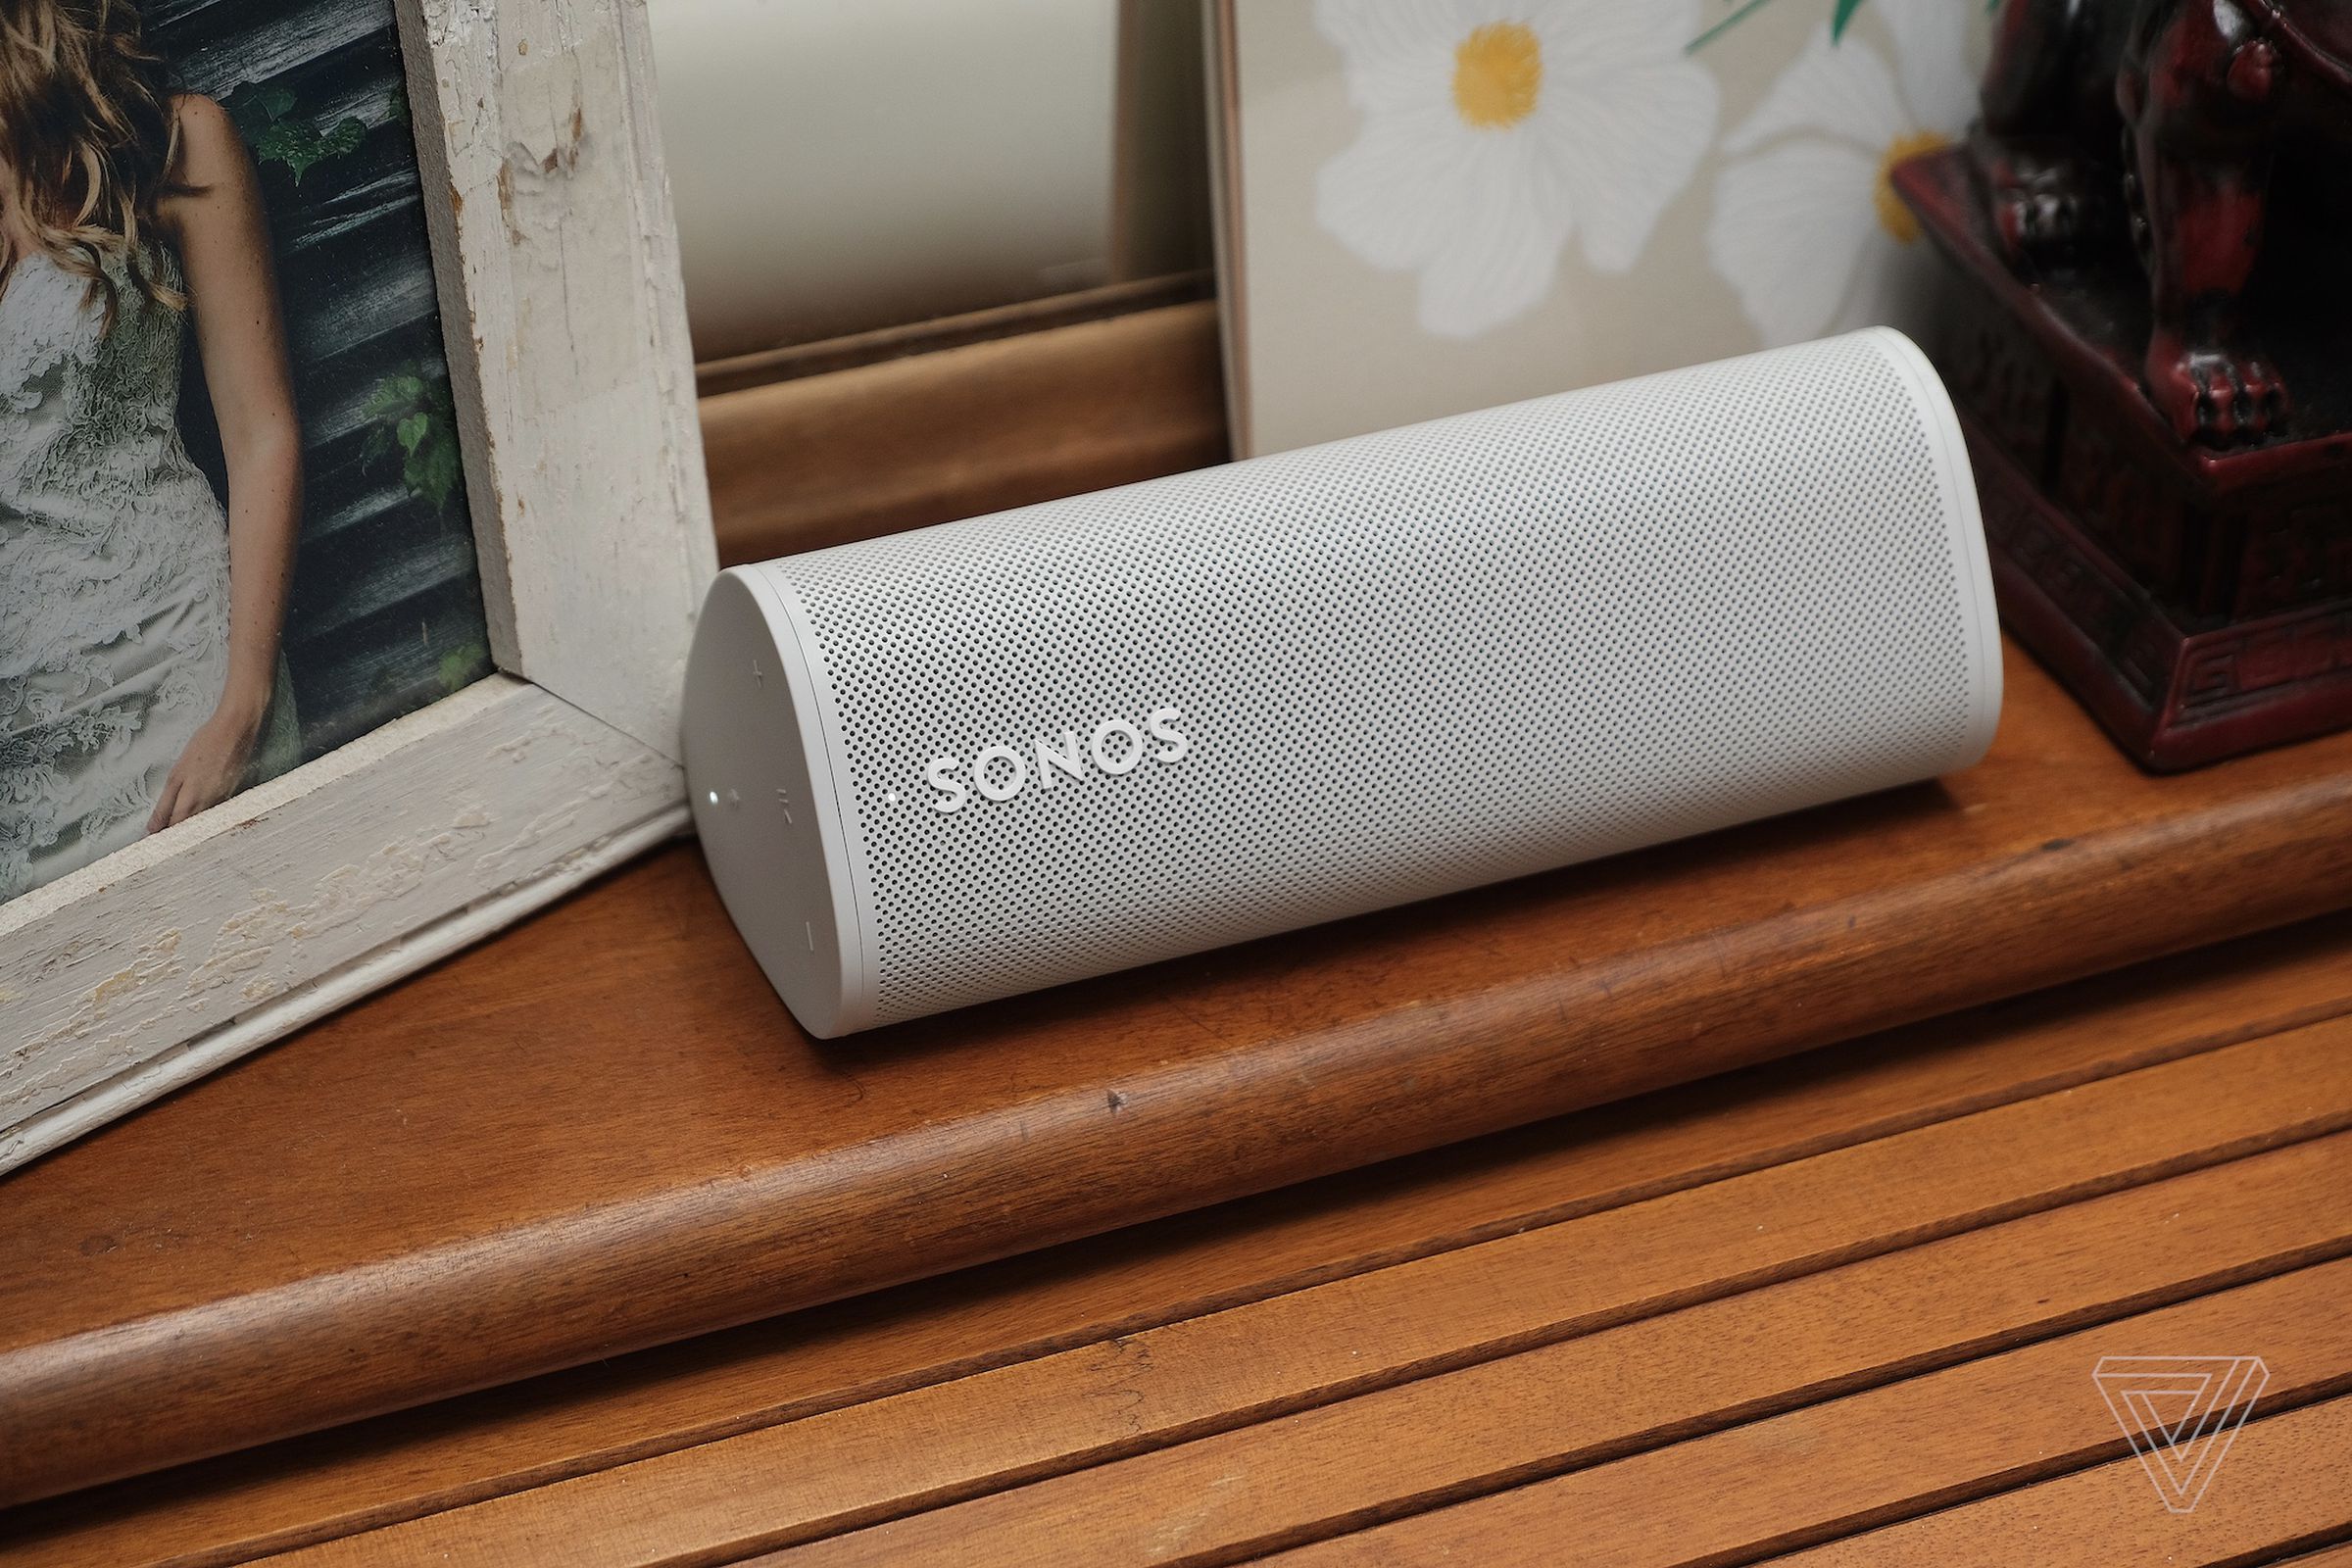 The Sonos Roam, like most other Sonos speakers, is about to see a price hike.